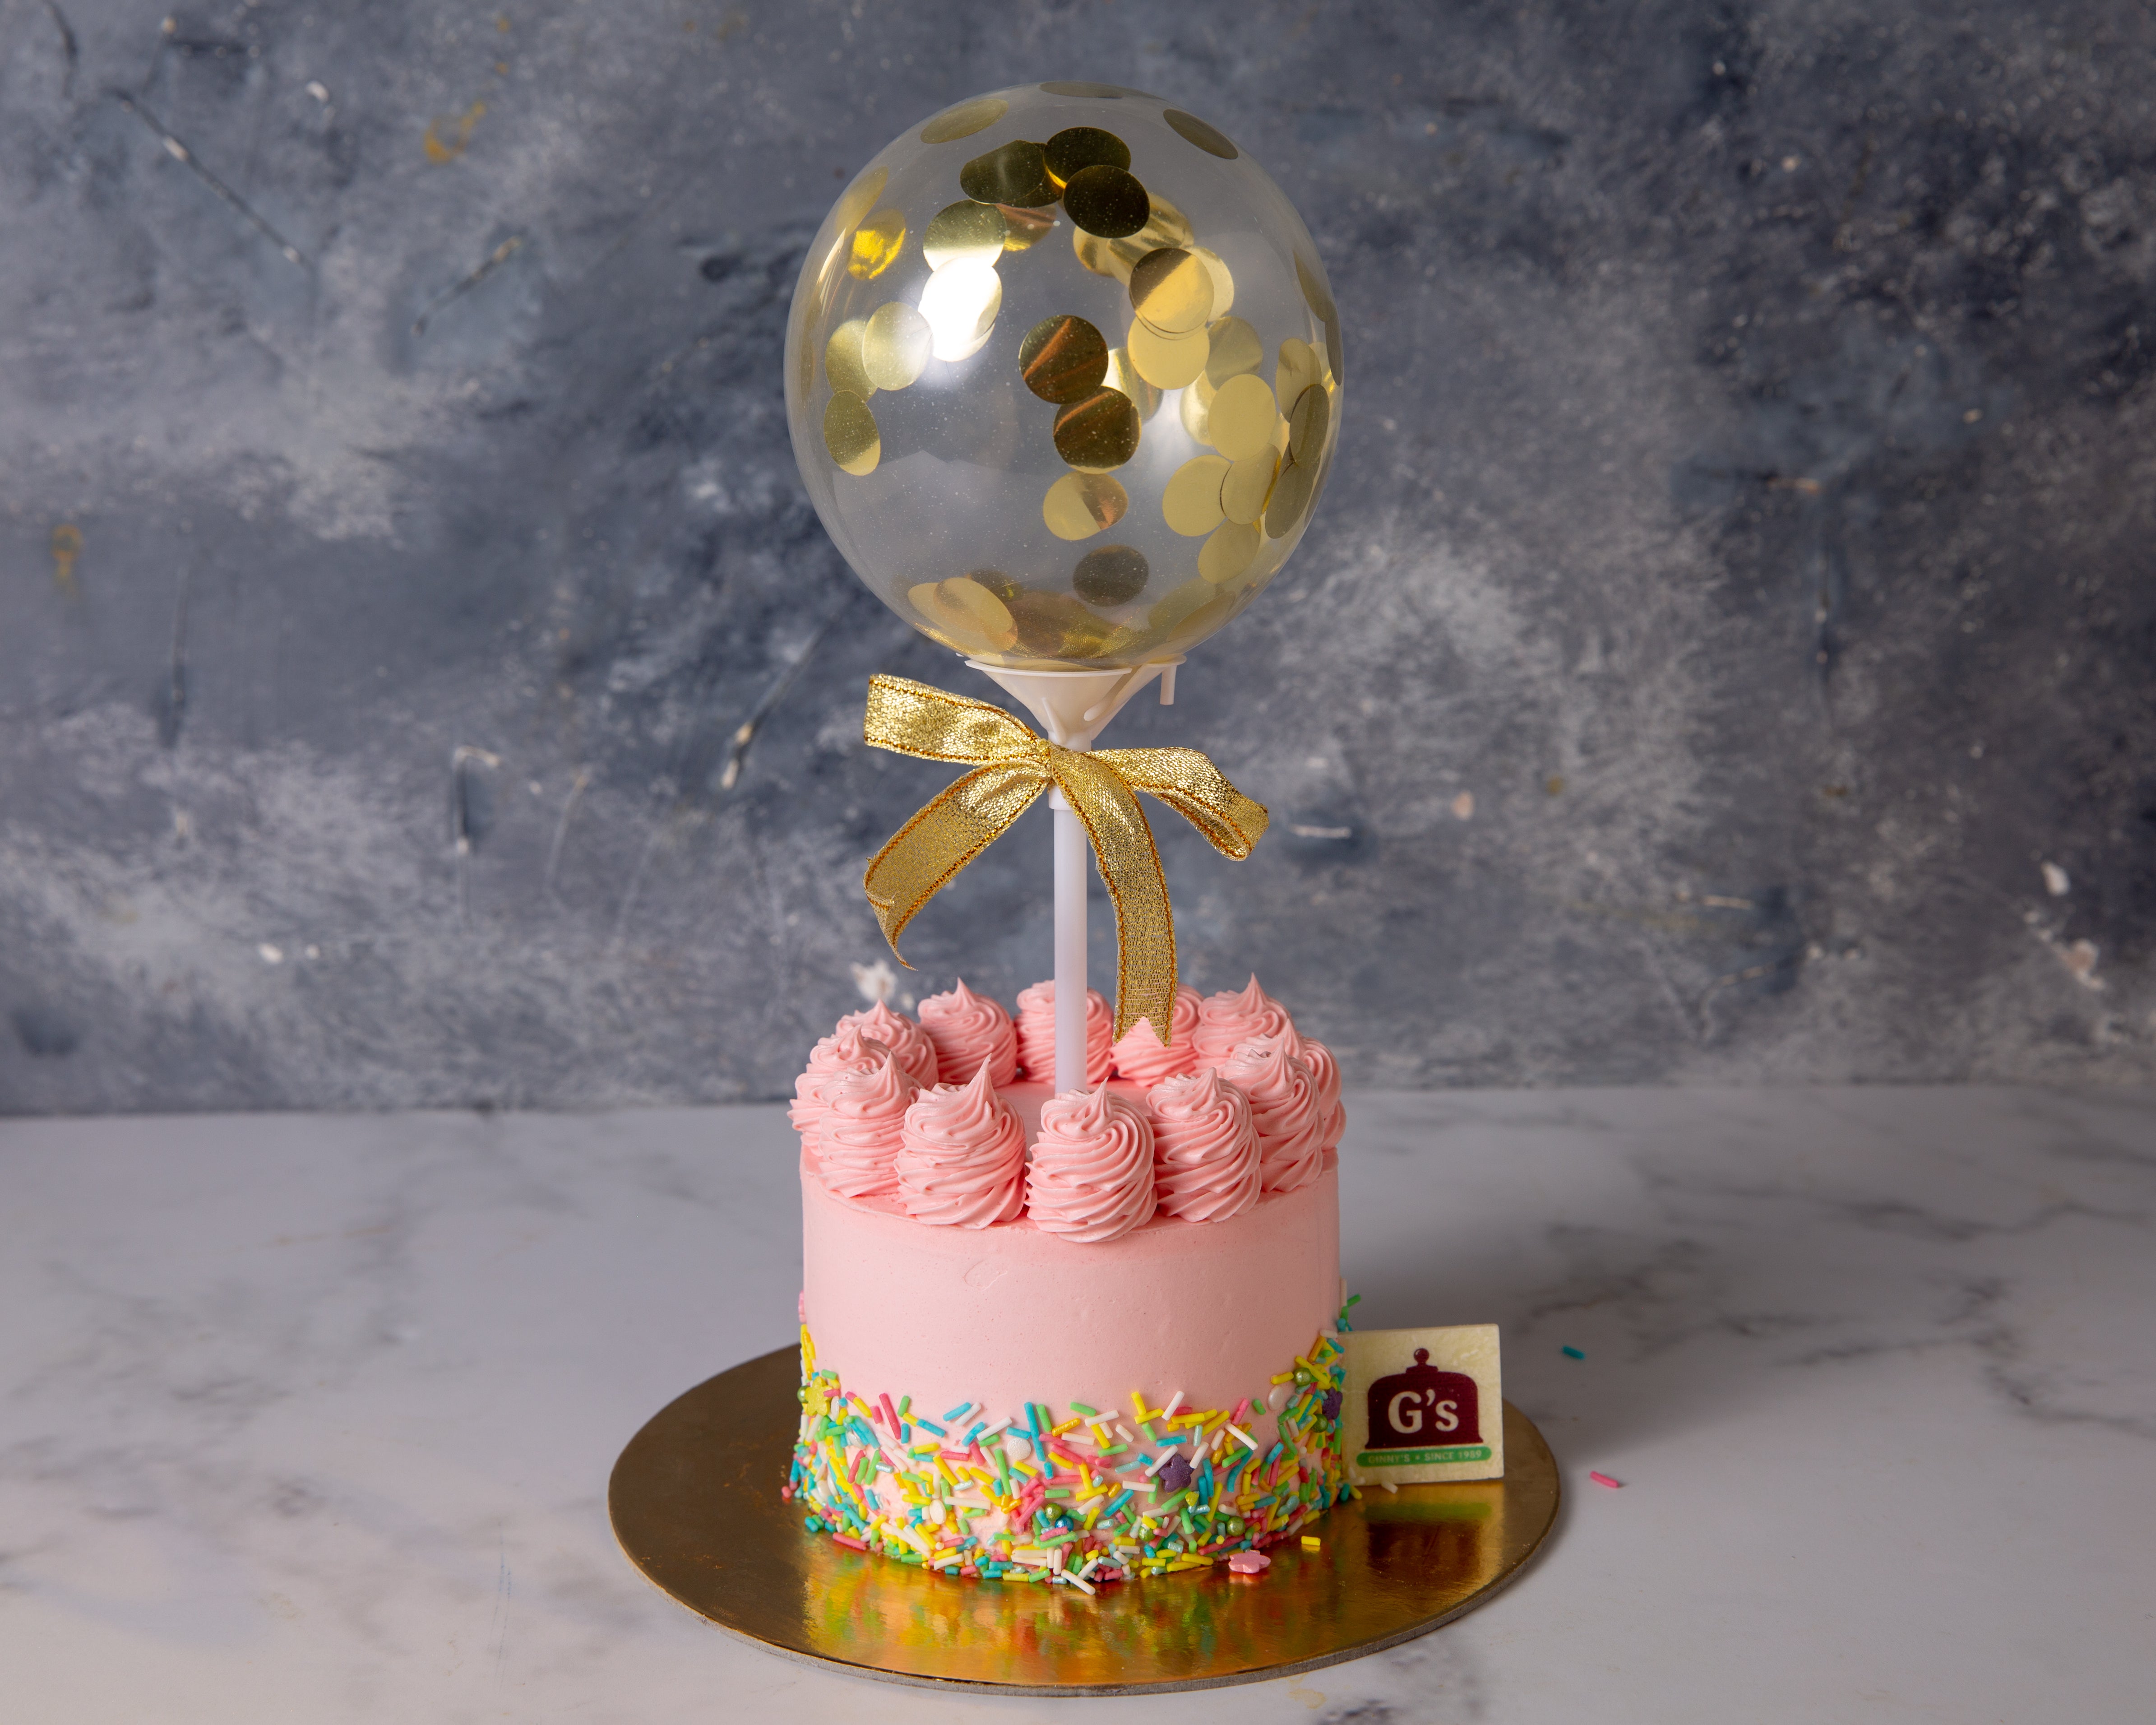 Cake with Balloon